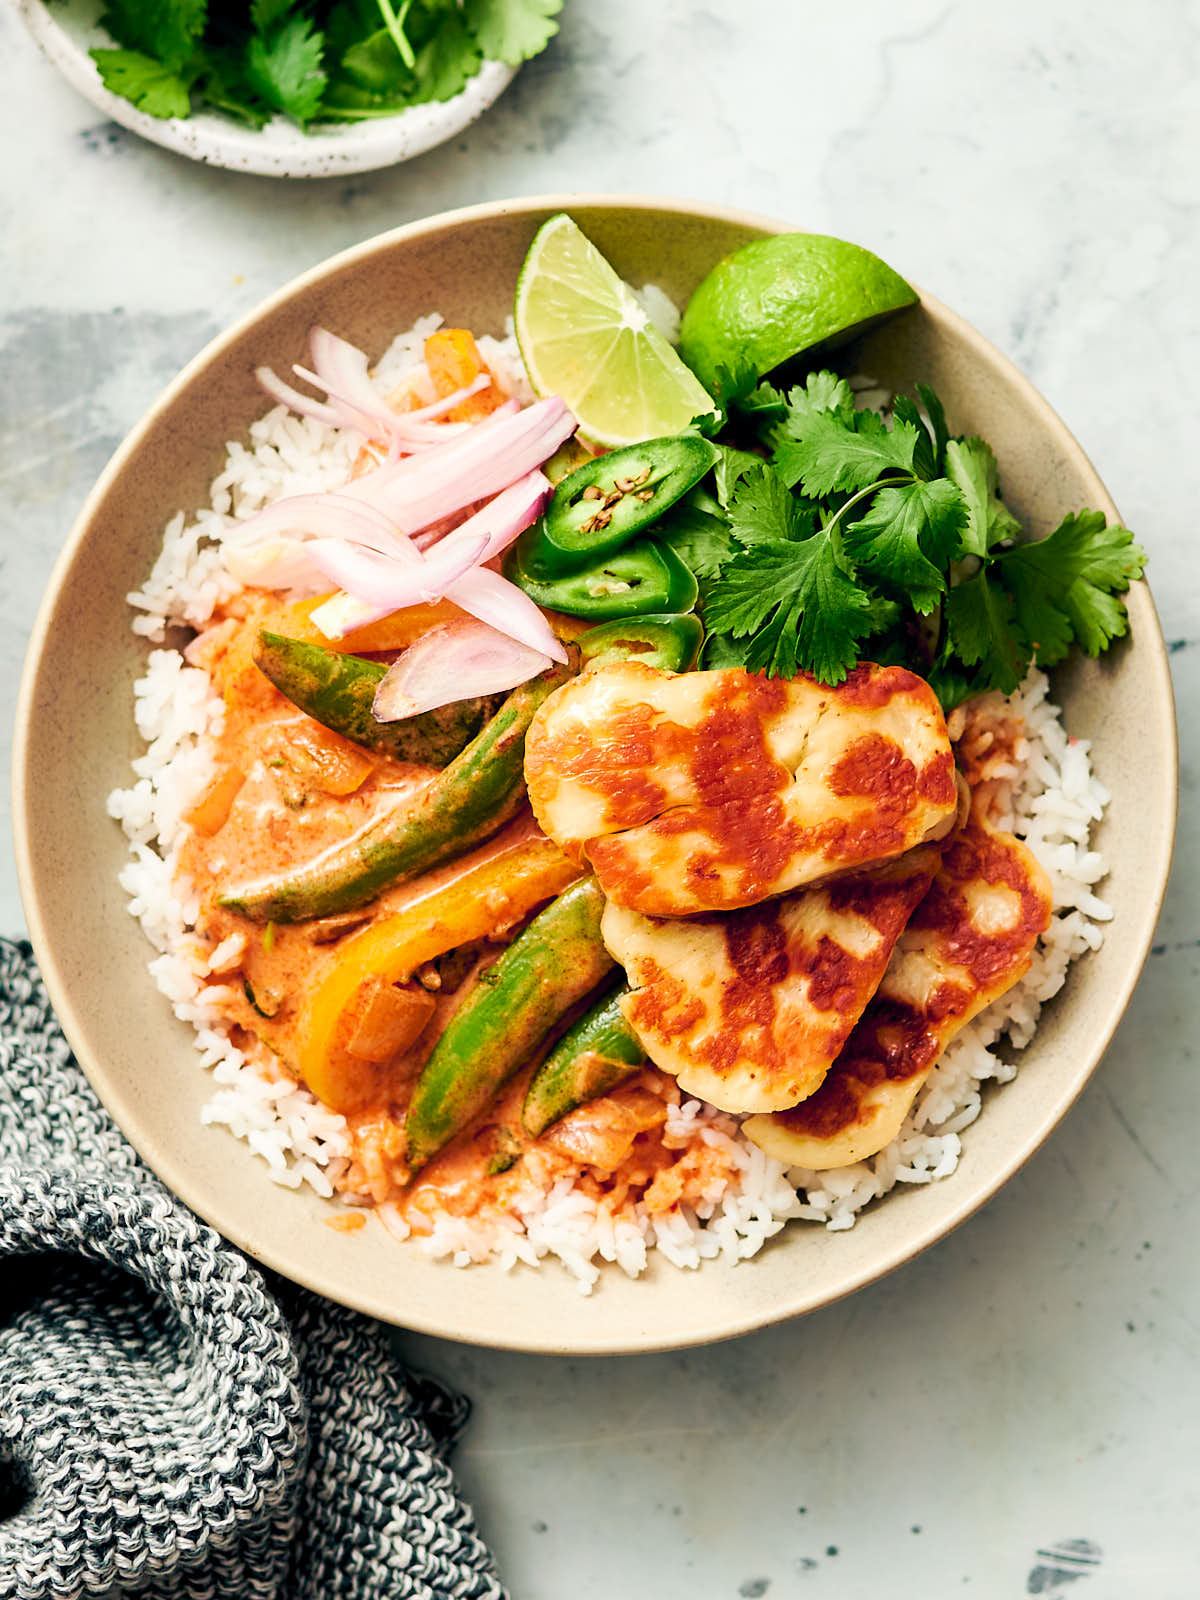 Easy Halloumi Curry spooned over a bowl of rice with fresh herbs and limes.